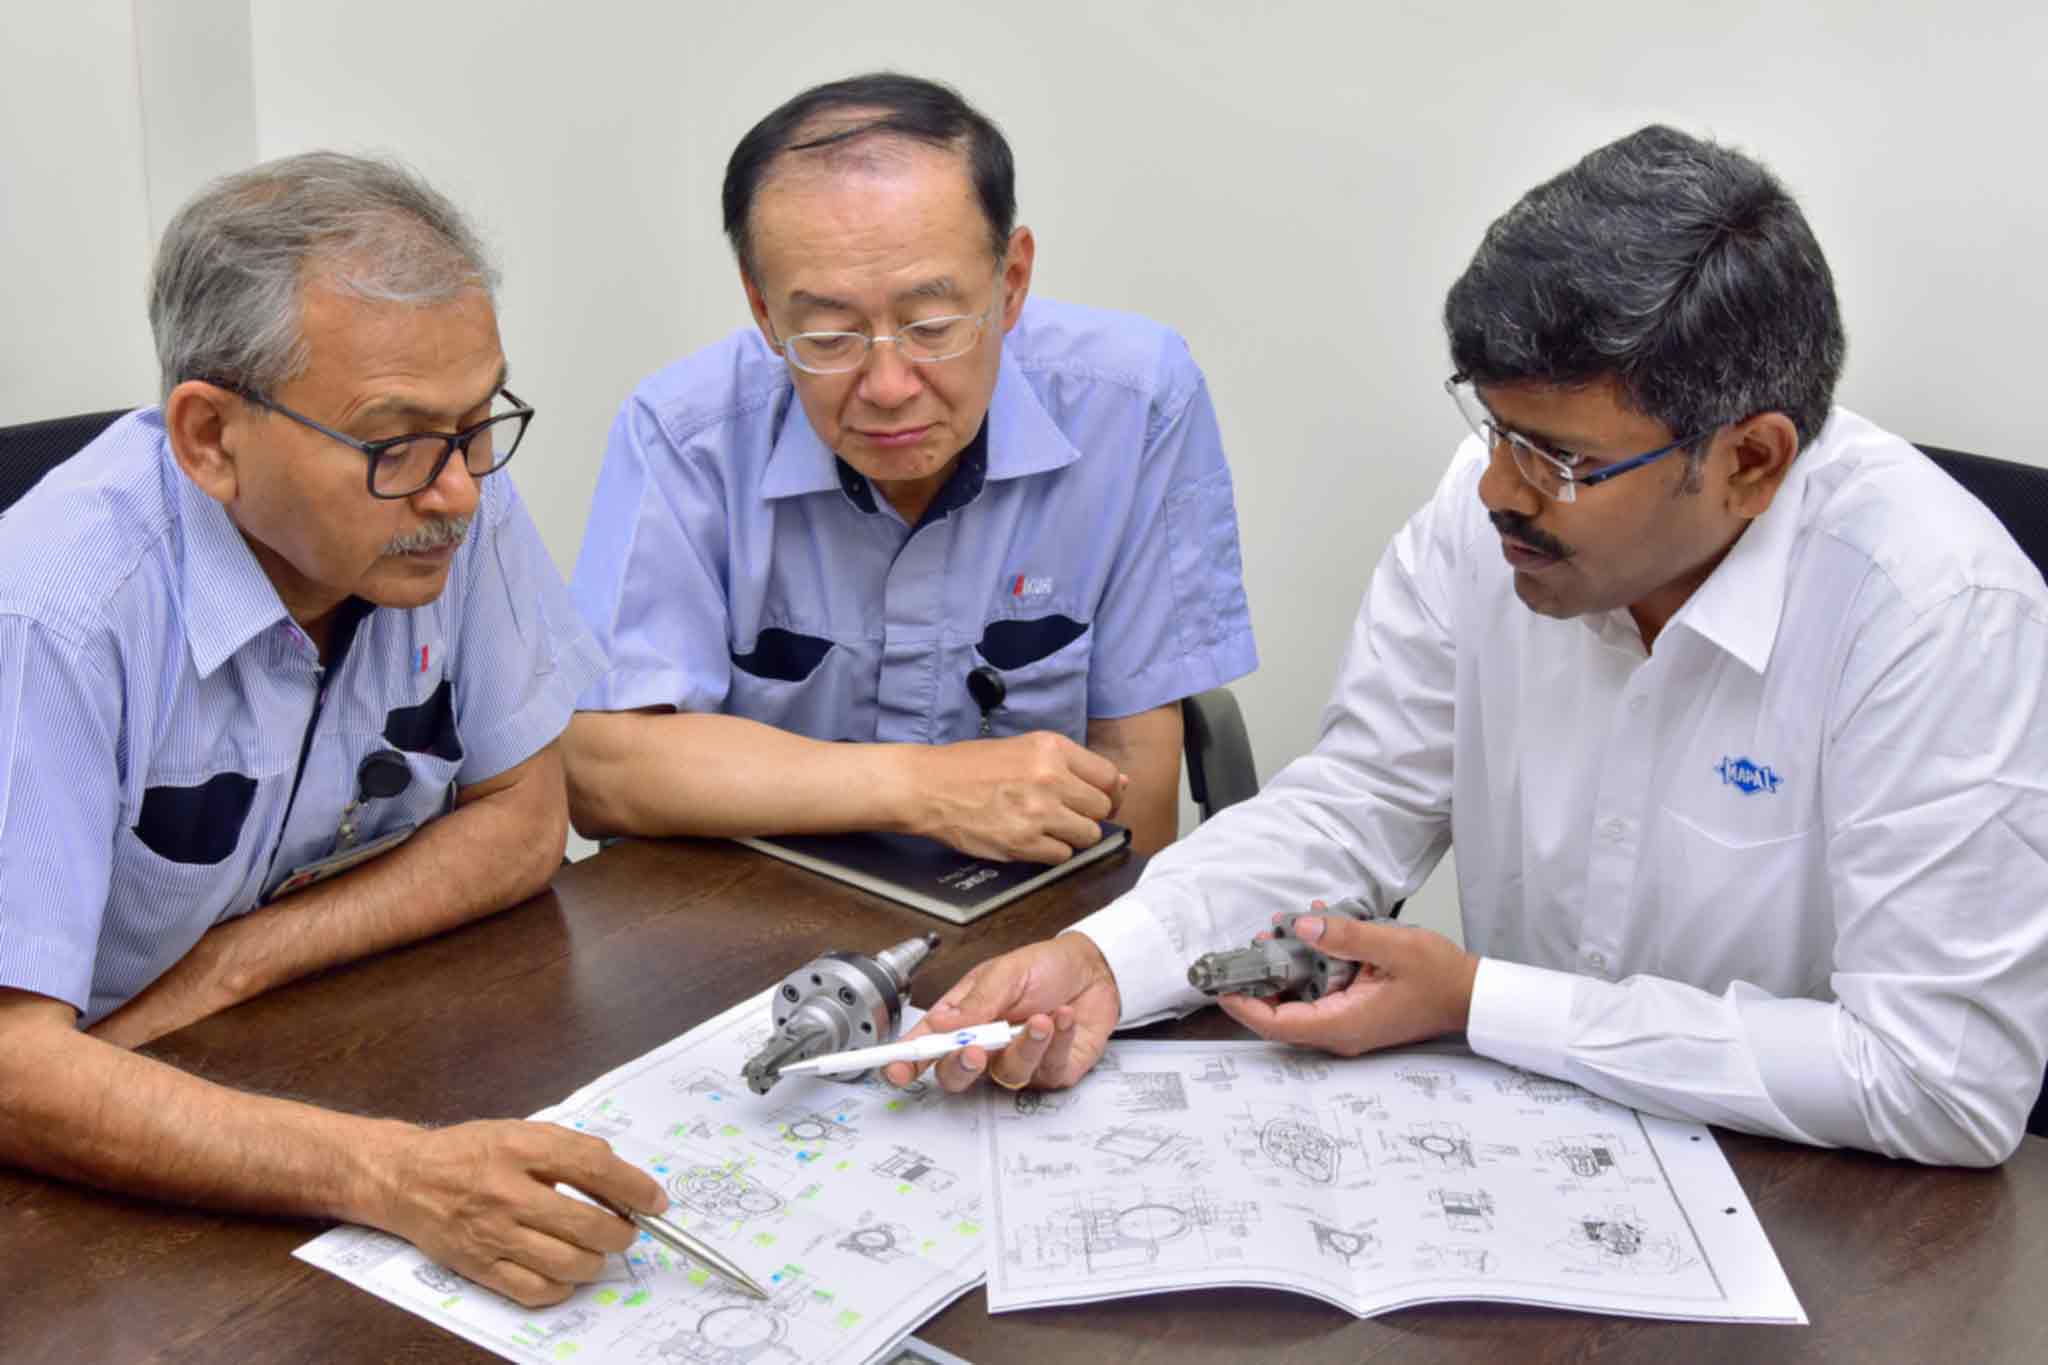 Toshiya Ochiai and Dinesh Gupta from Mikuni with Rajesh Kumar from MAPAL India are shown on the left.